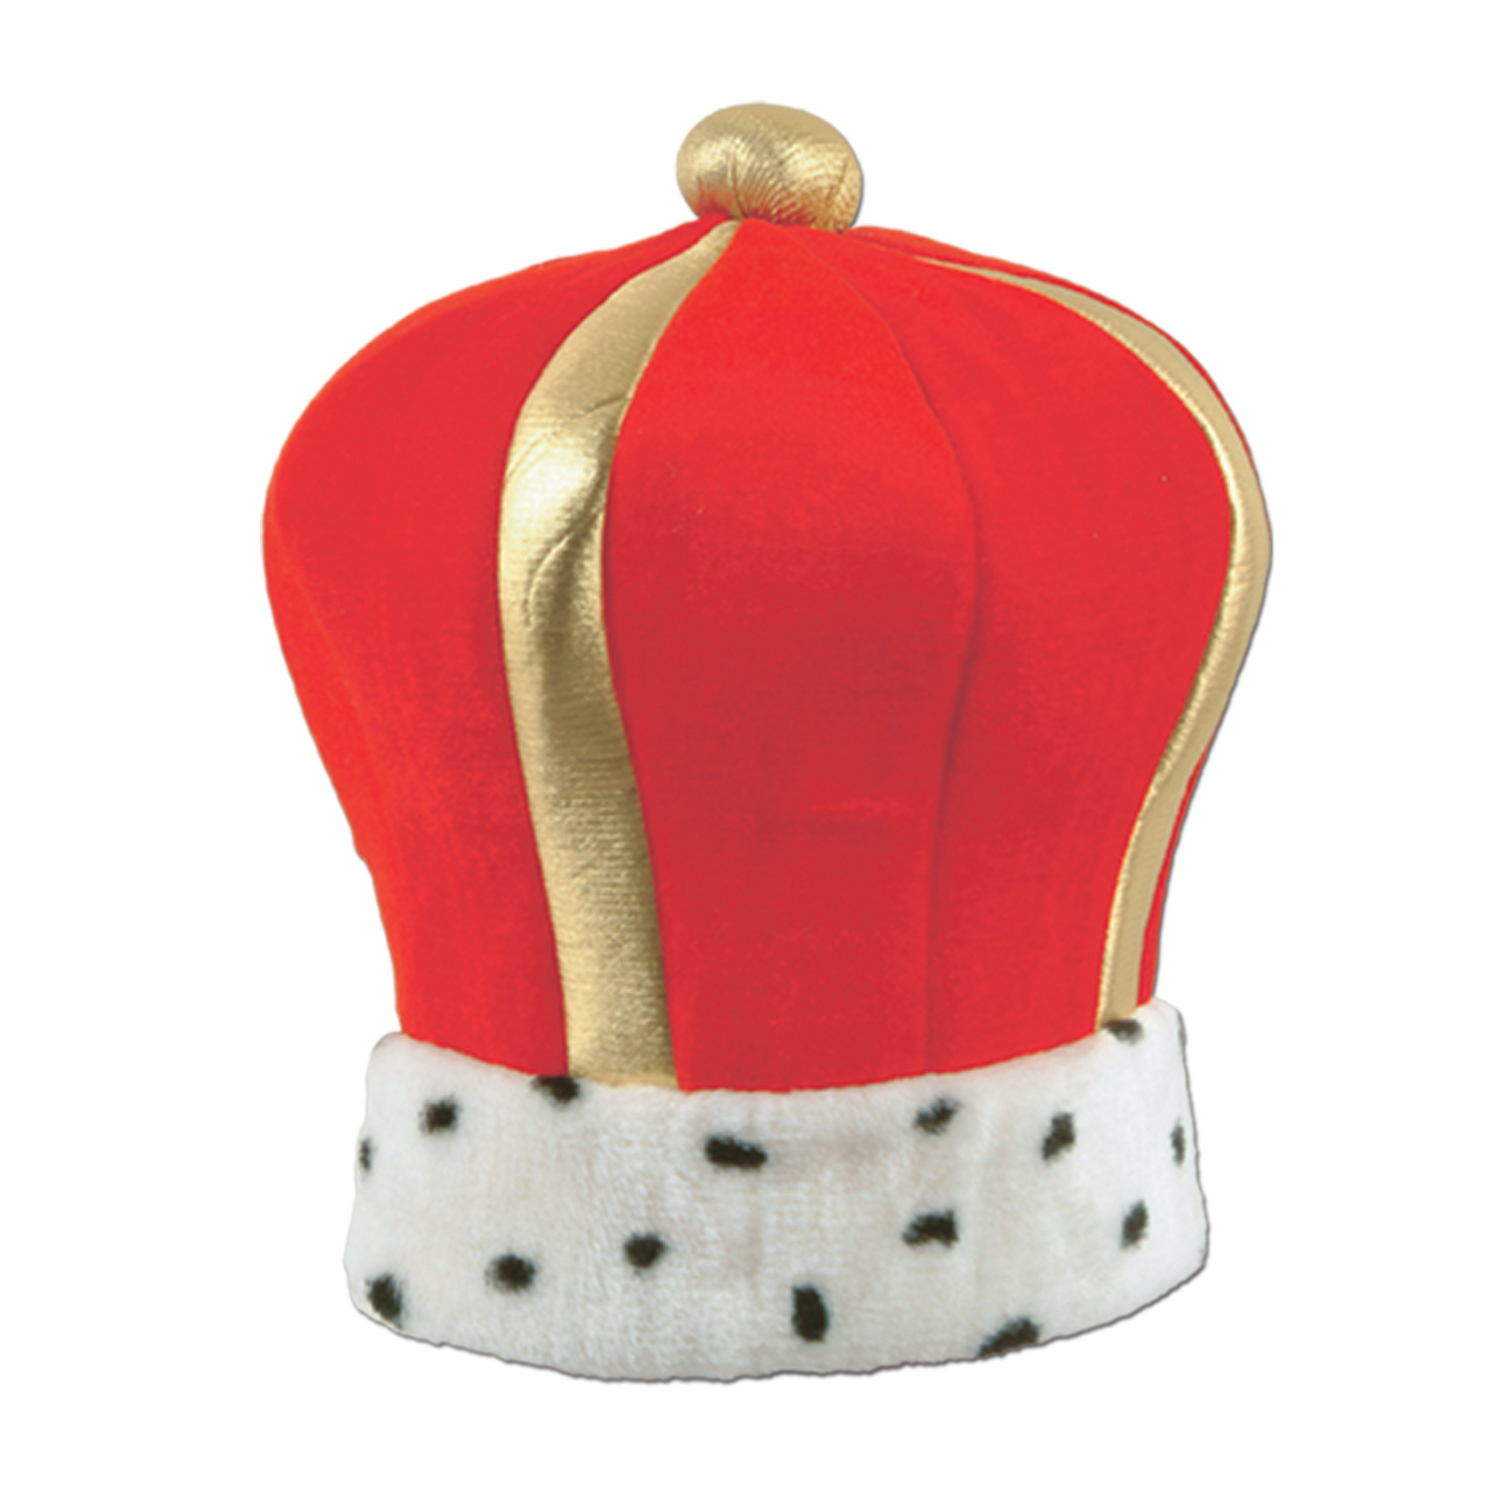 red and white fabric kings crown